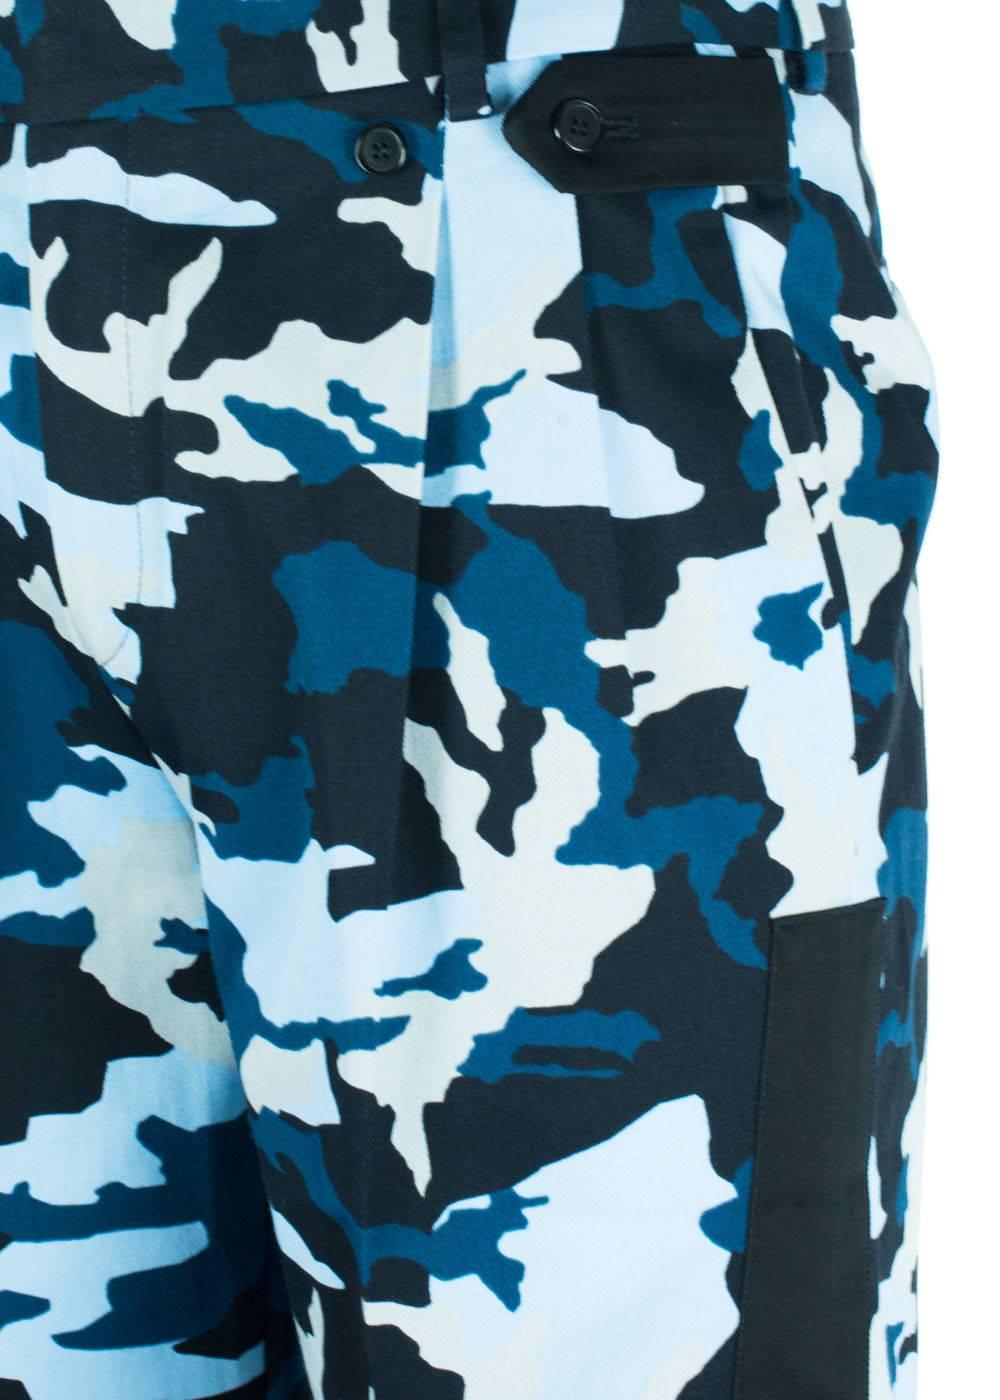 Brand New Givenchy Men's Shorts
Original Tags
Retails in Stores & Online for $550
Men's Size E48 / US32 Fits True to Size


Shorts are a must have for this summer season. Keep yourself chill and trendy with these Givenchy blue camouflage board